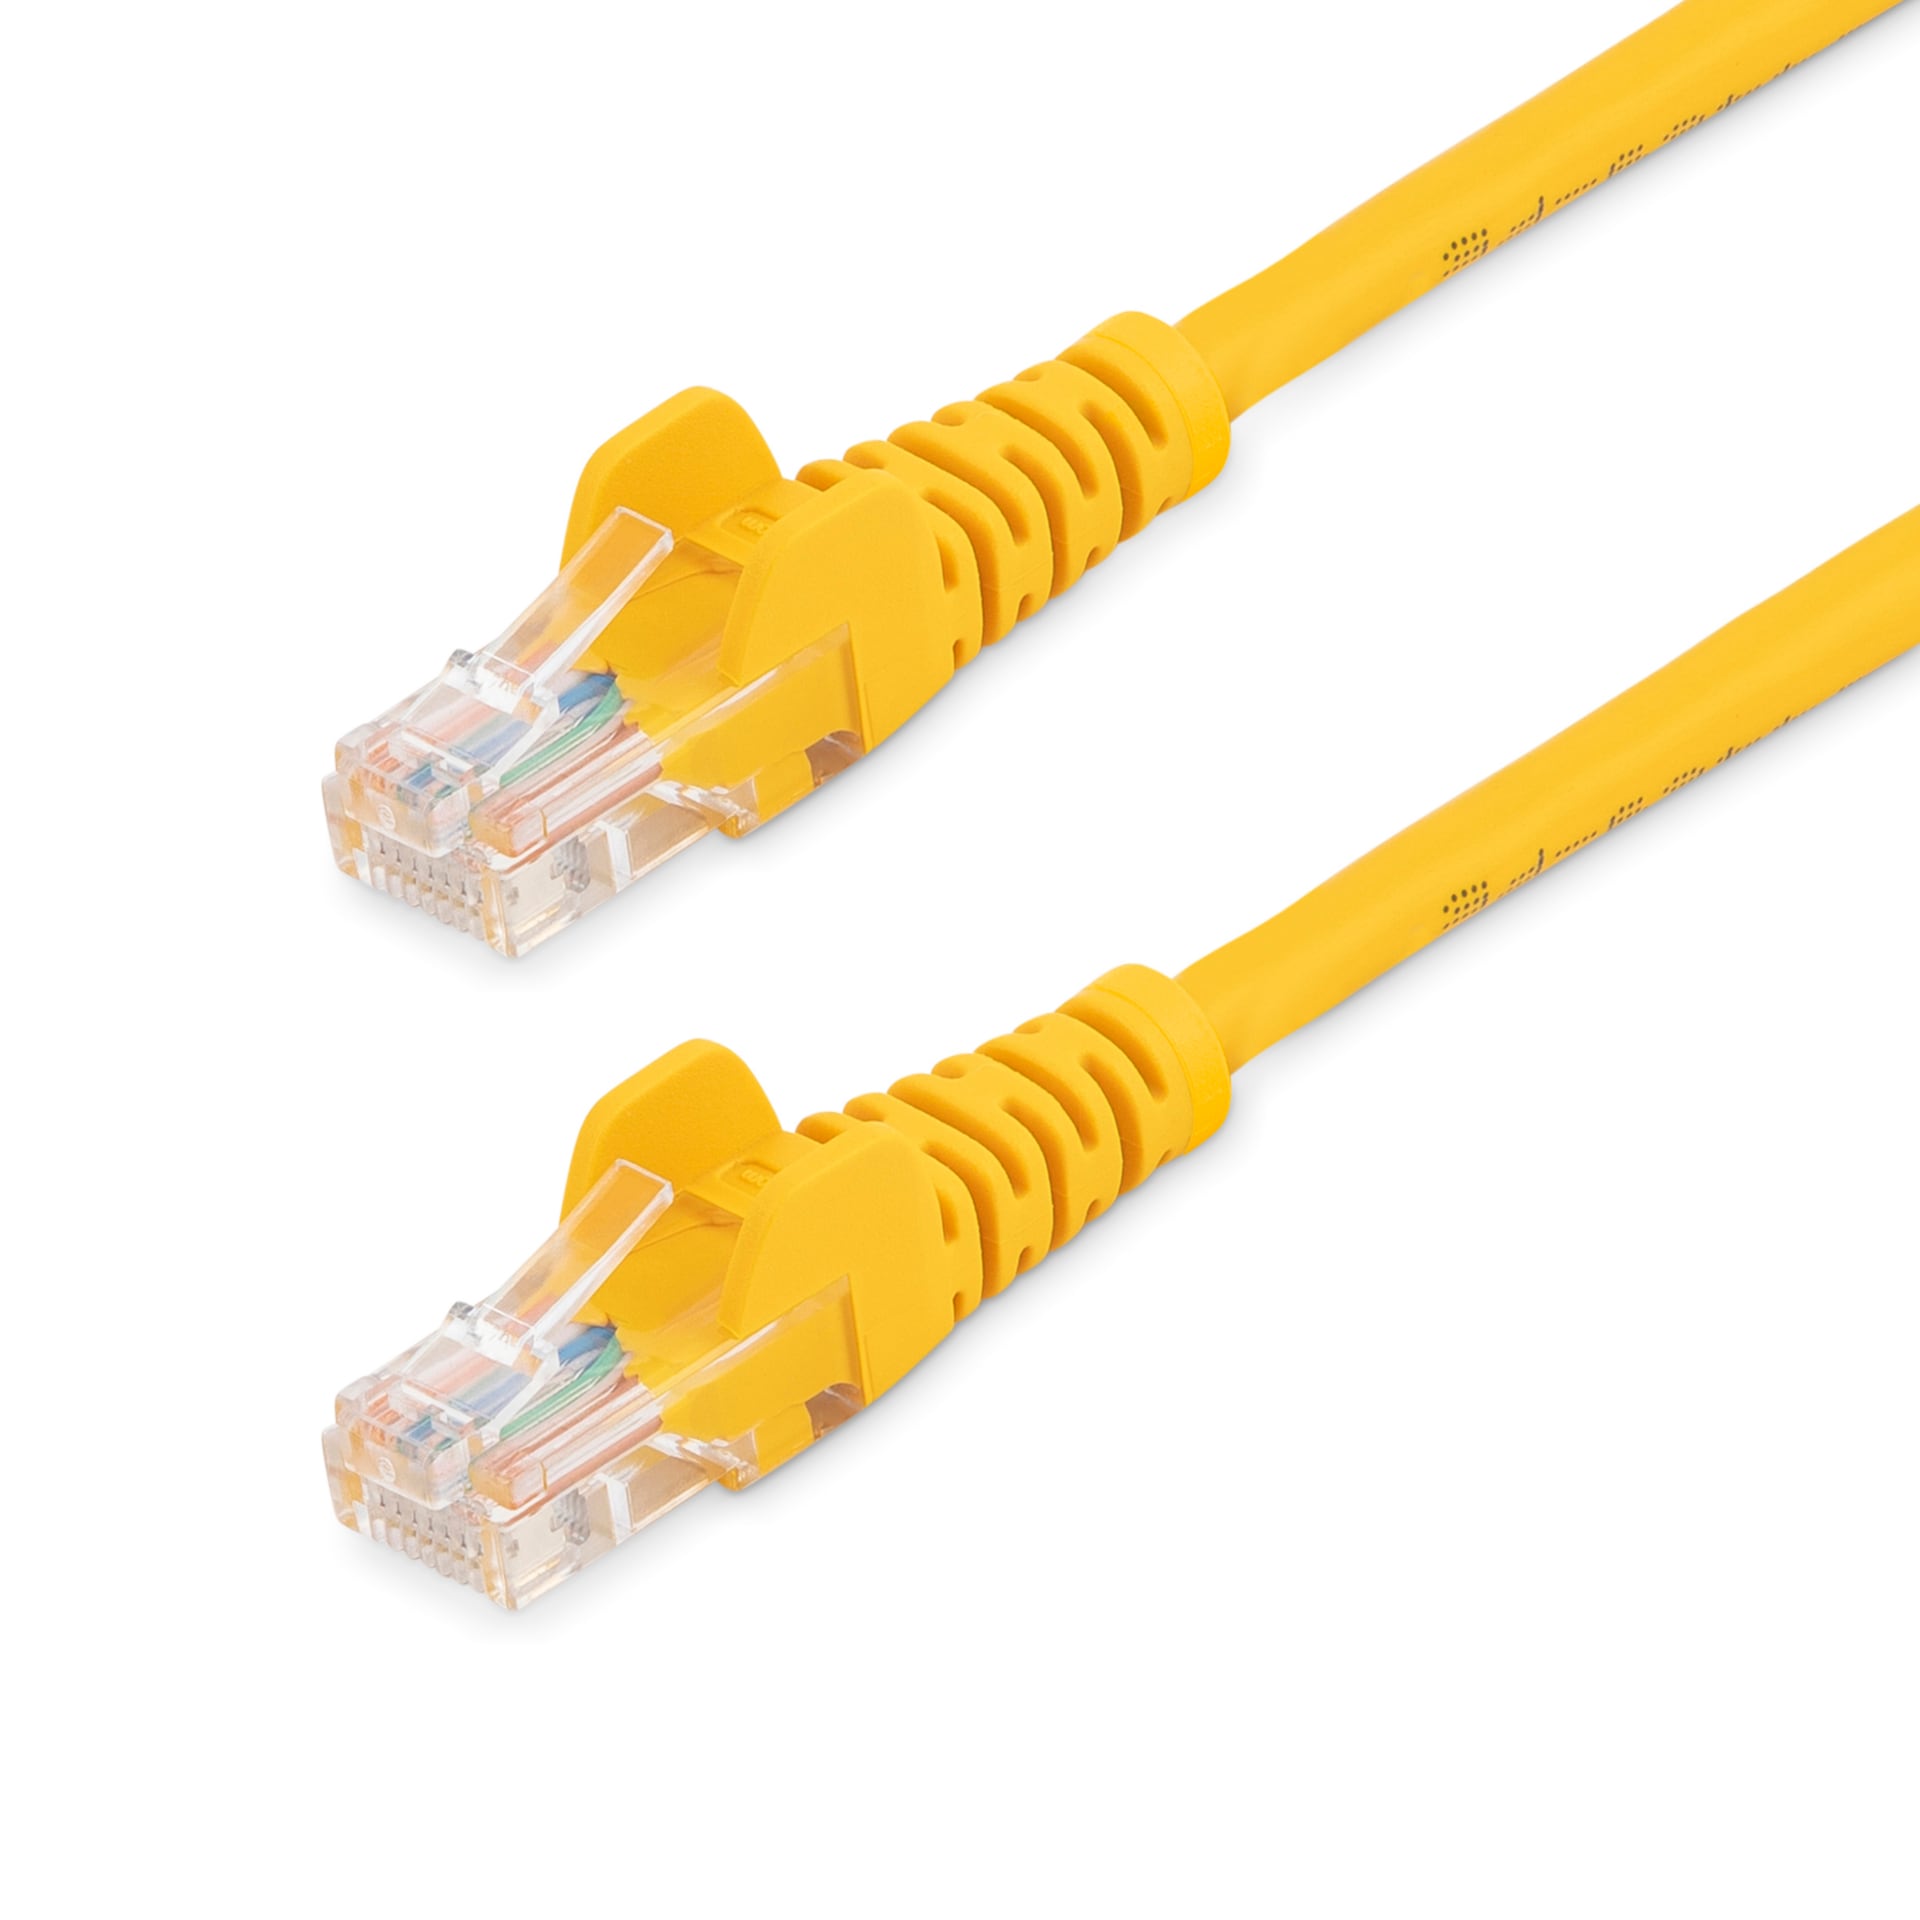 StarTech.com Cat5e Ethernet Cable 10 ft Yellow Cat 5e Snagless Patch Cable